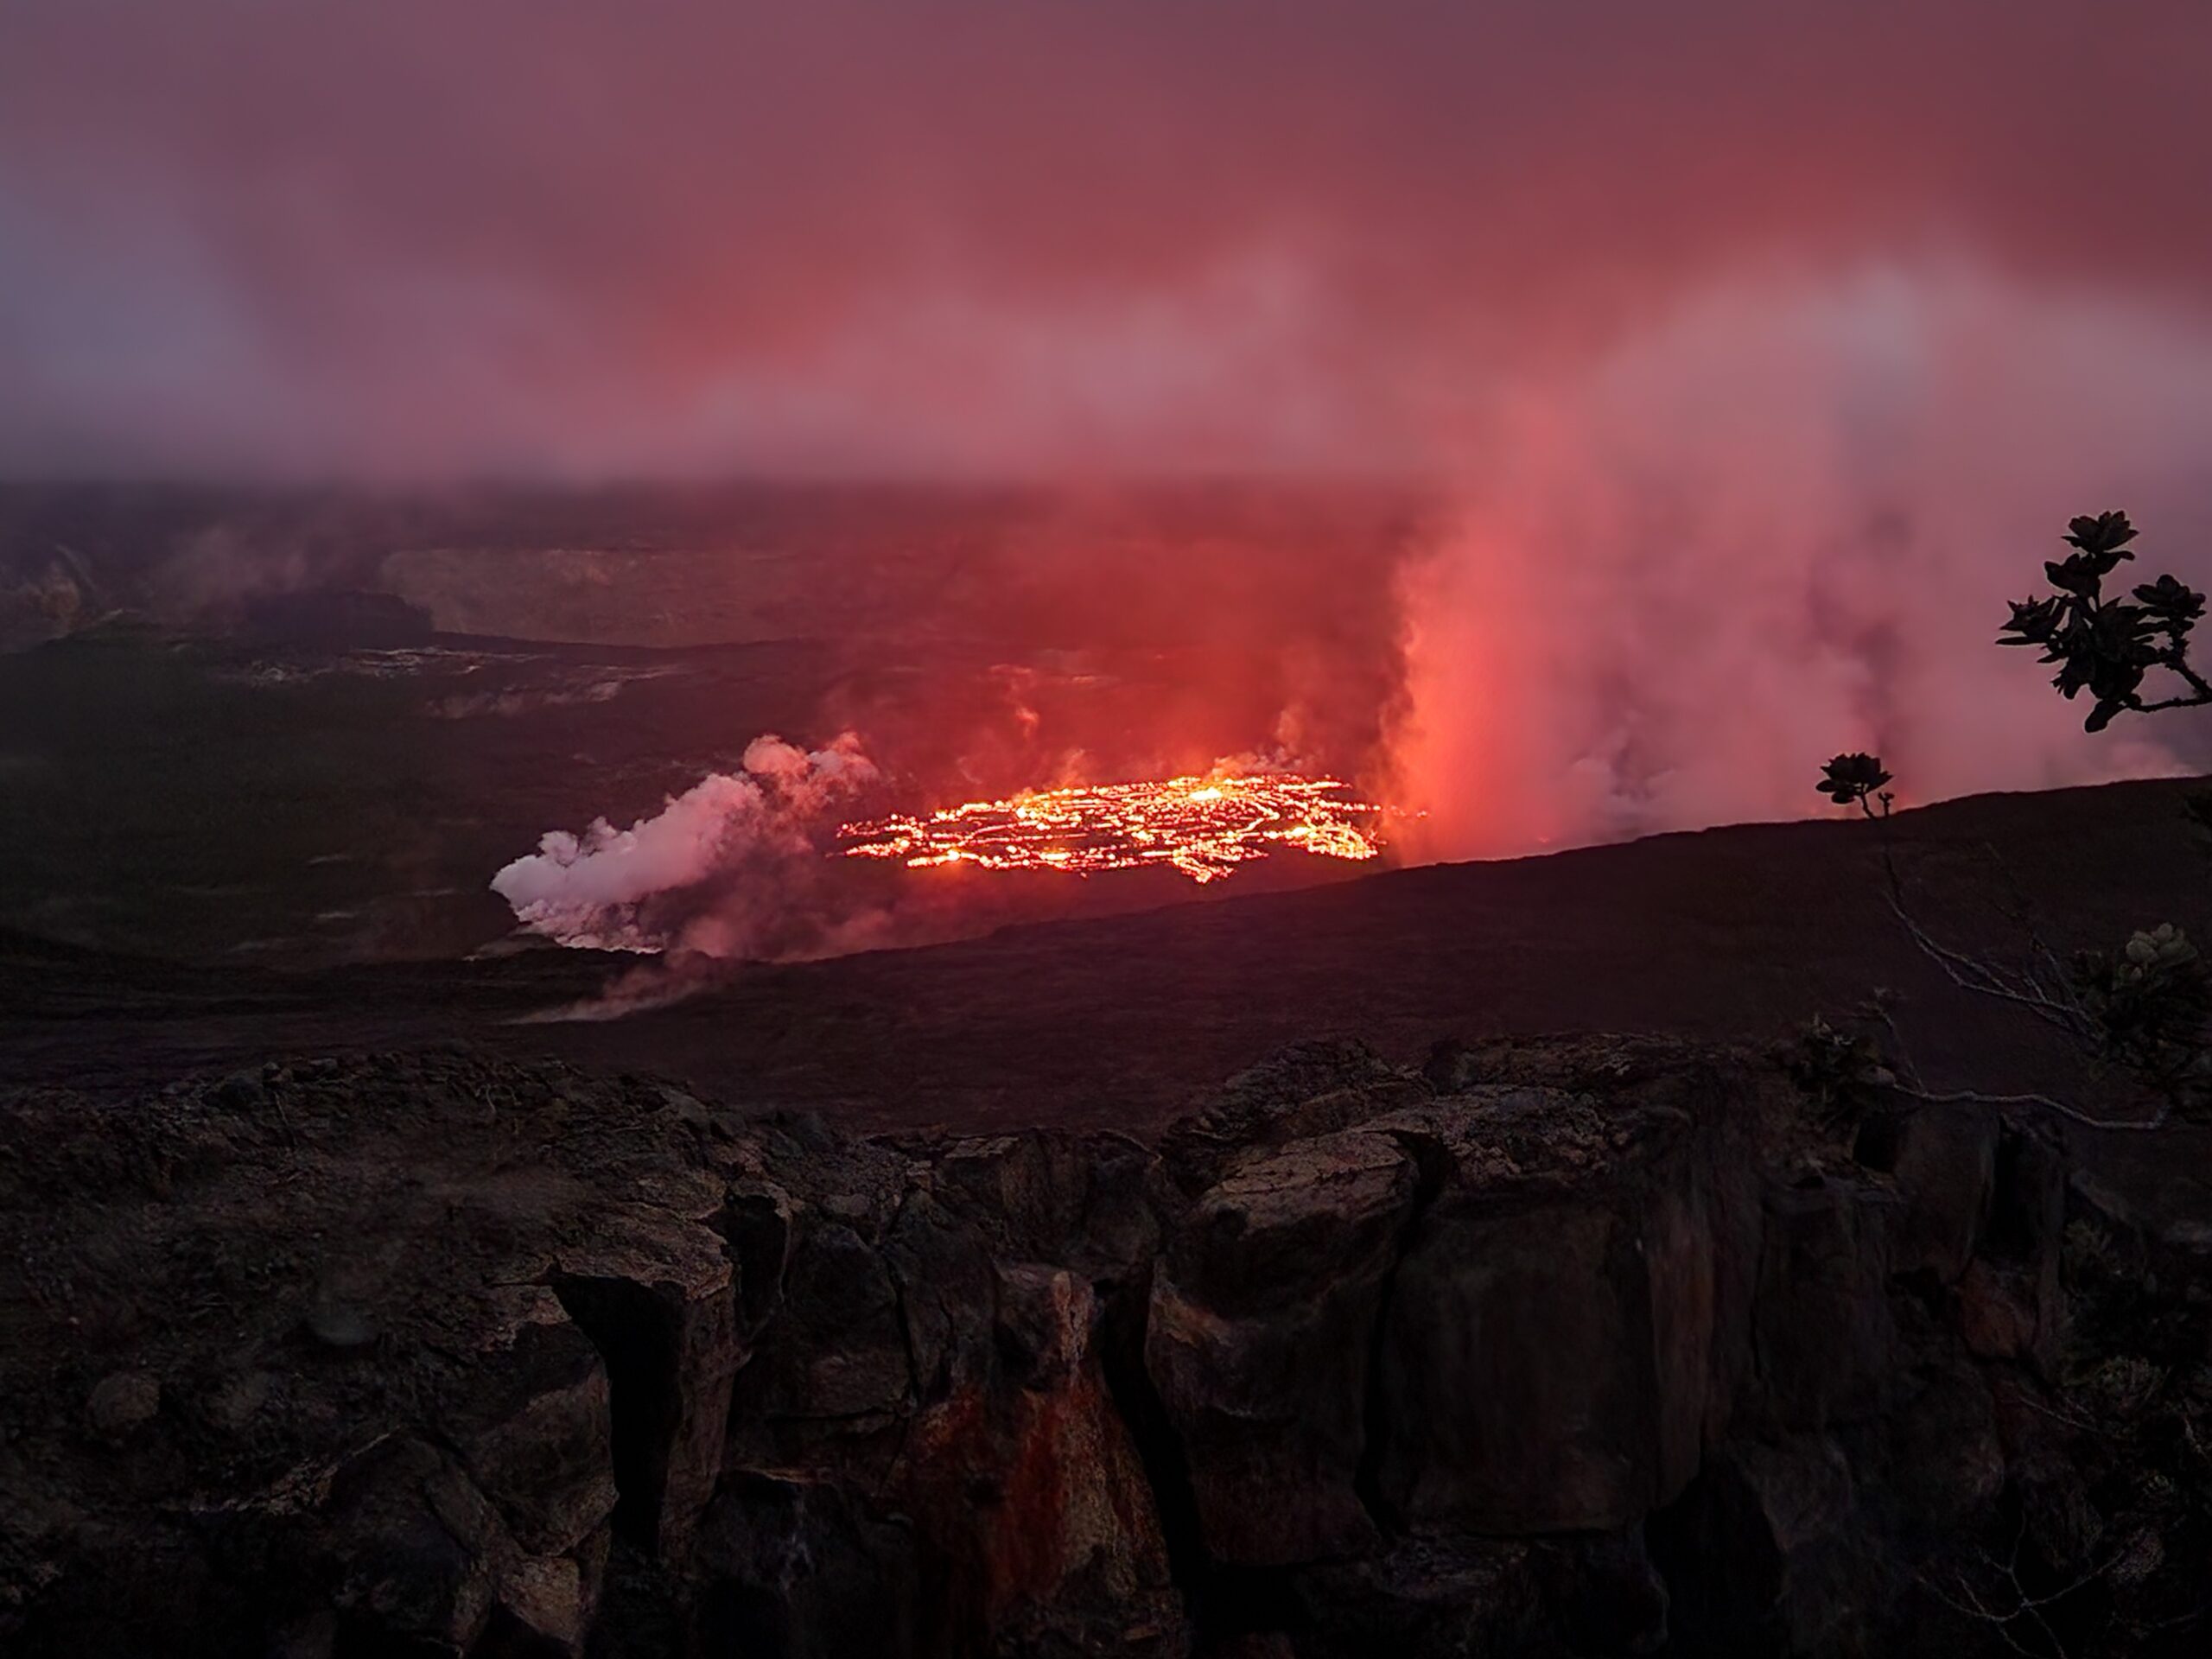 an active volcano seen from the top of an adjacent hill. Red hot lava flows in rivers, surrounded by hills, with steam rising from the edges.